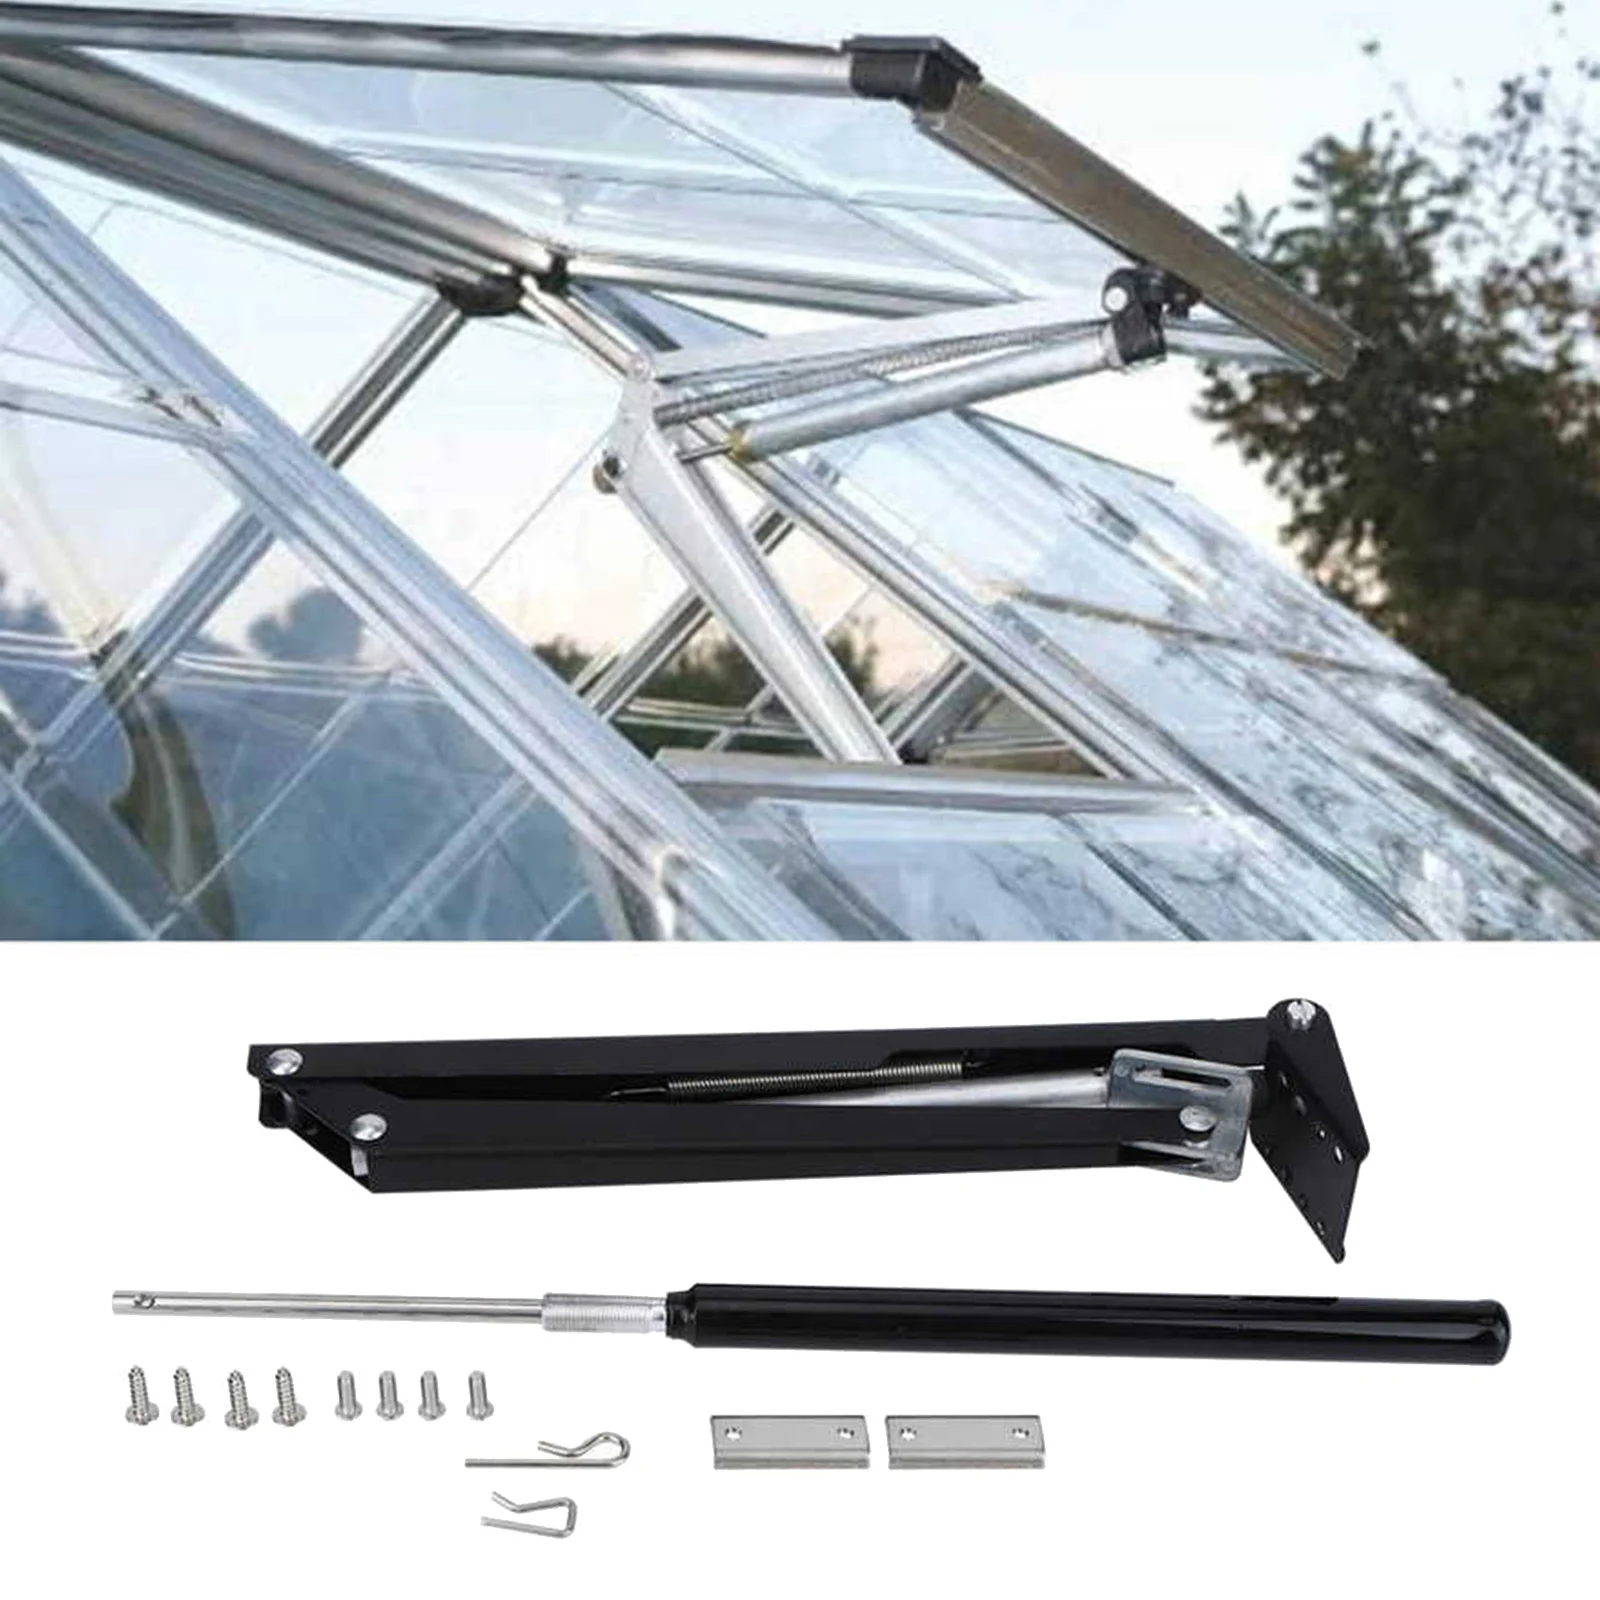 Greenhouse Window Accessories Automatic Vent Roof Opener Solar Sensing